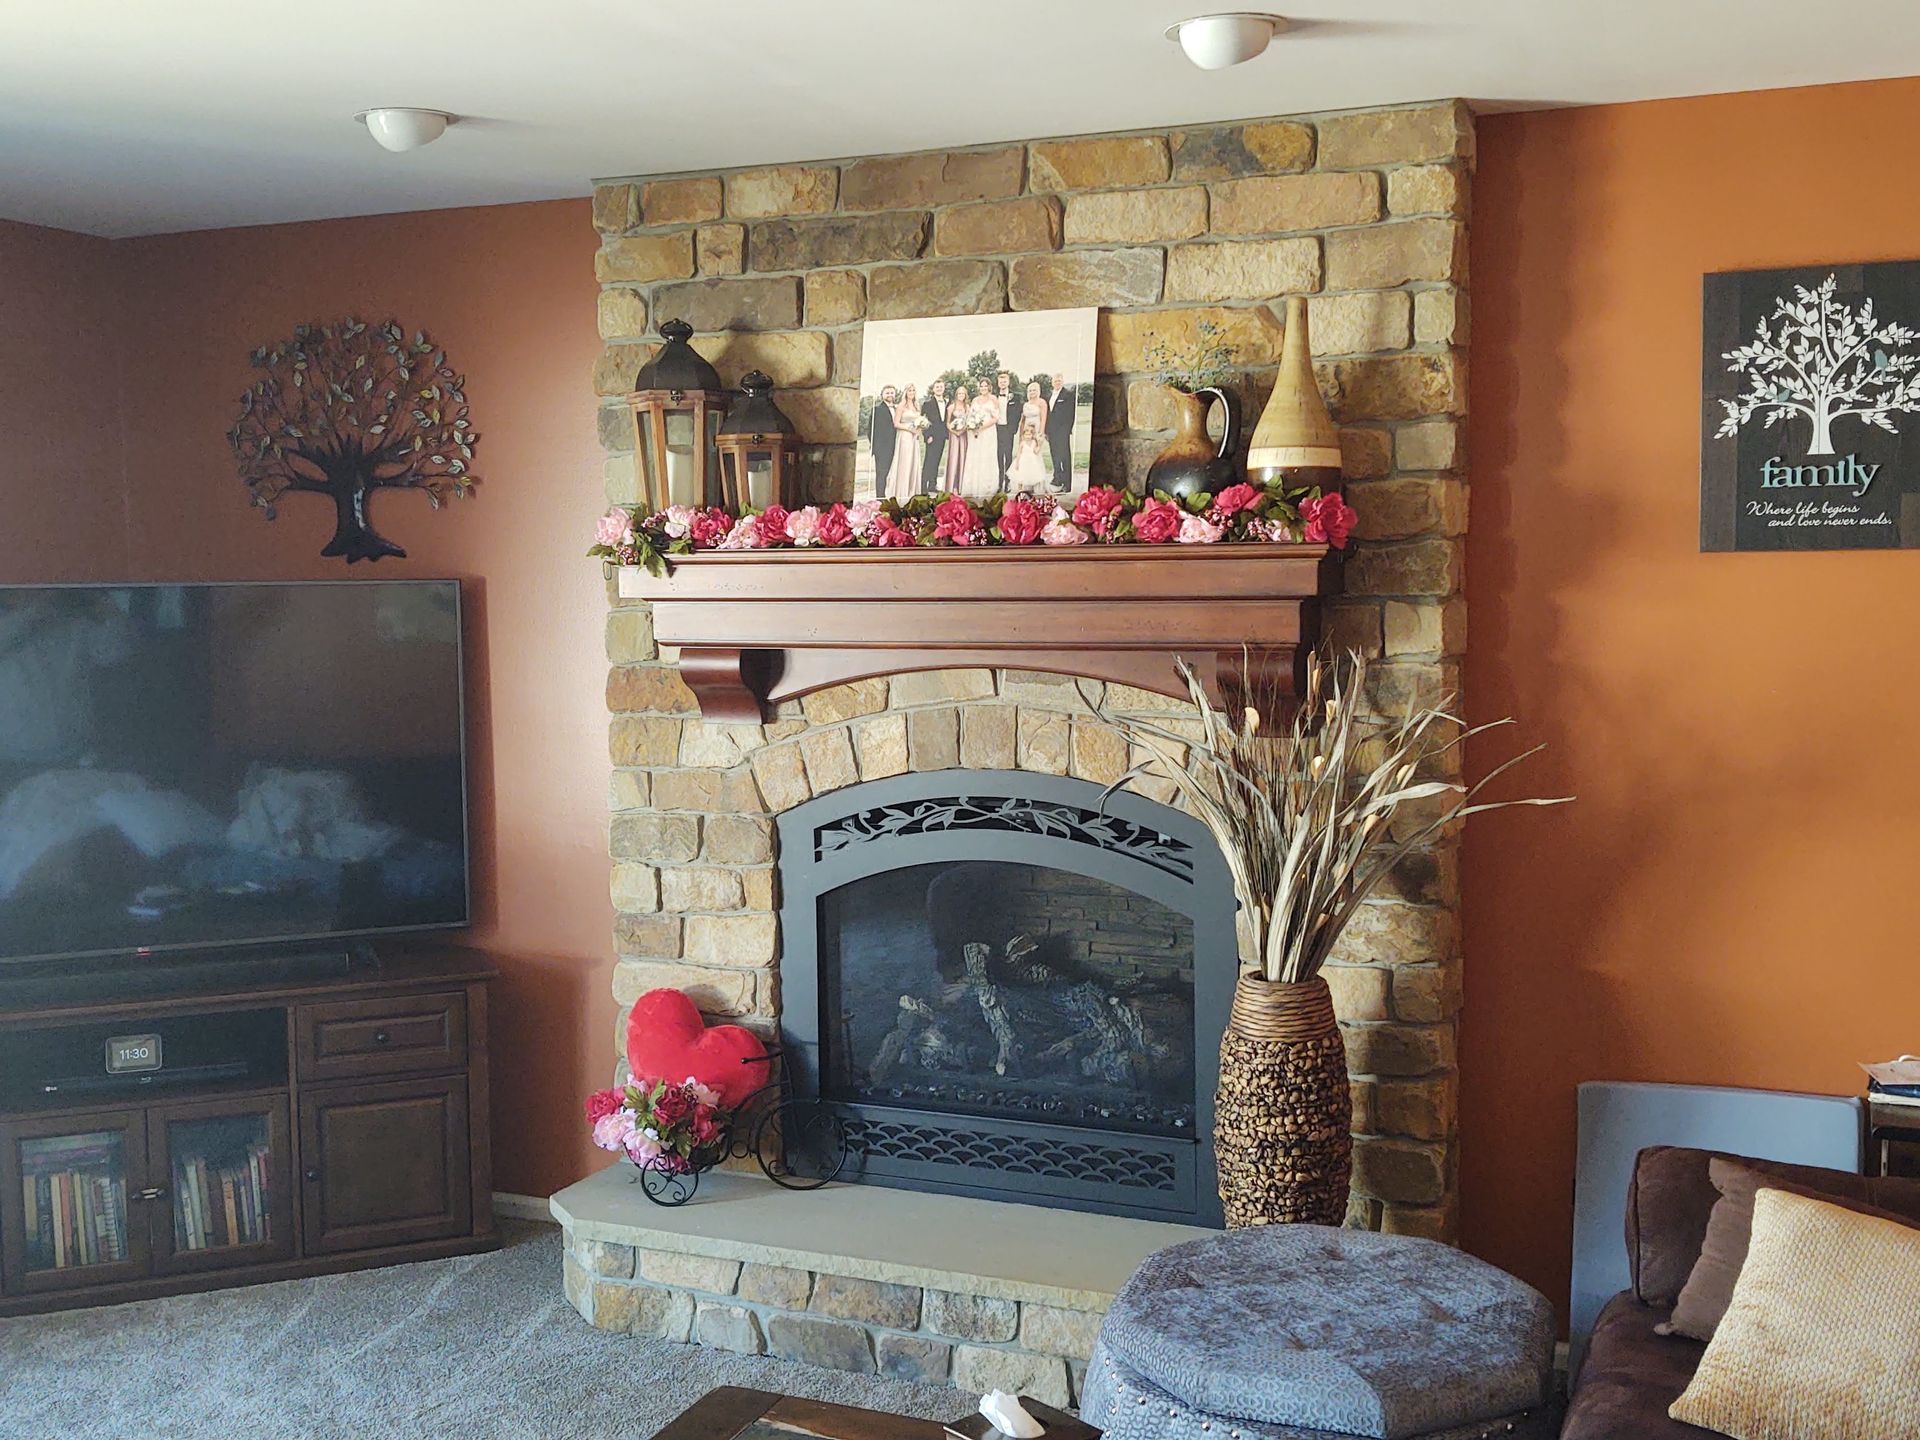 Natural Fireplace — Modern Fireplace With Brick Wall in Lan ghorne, PA